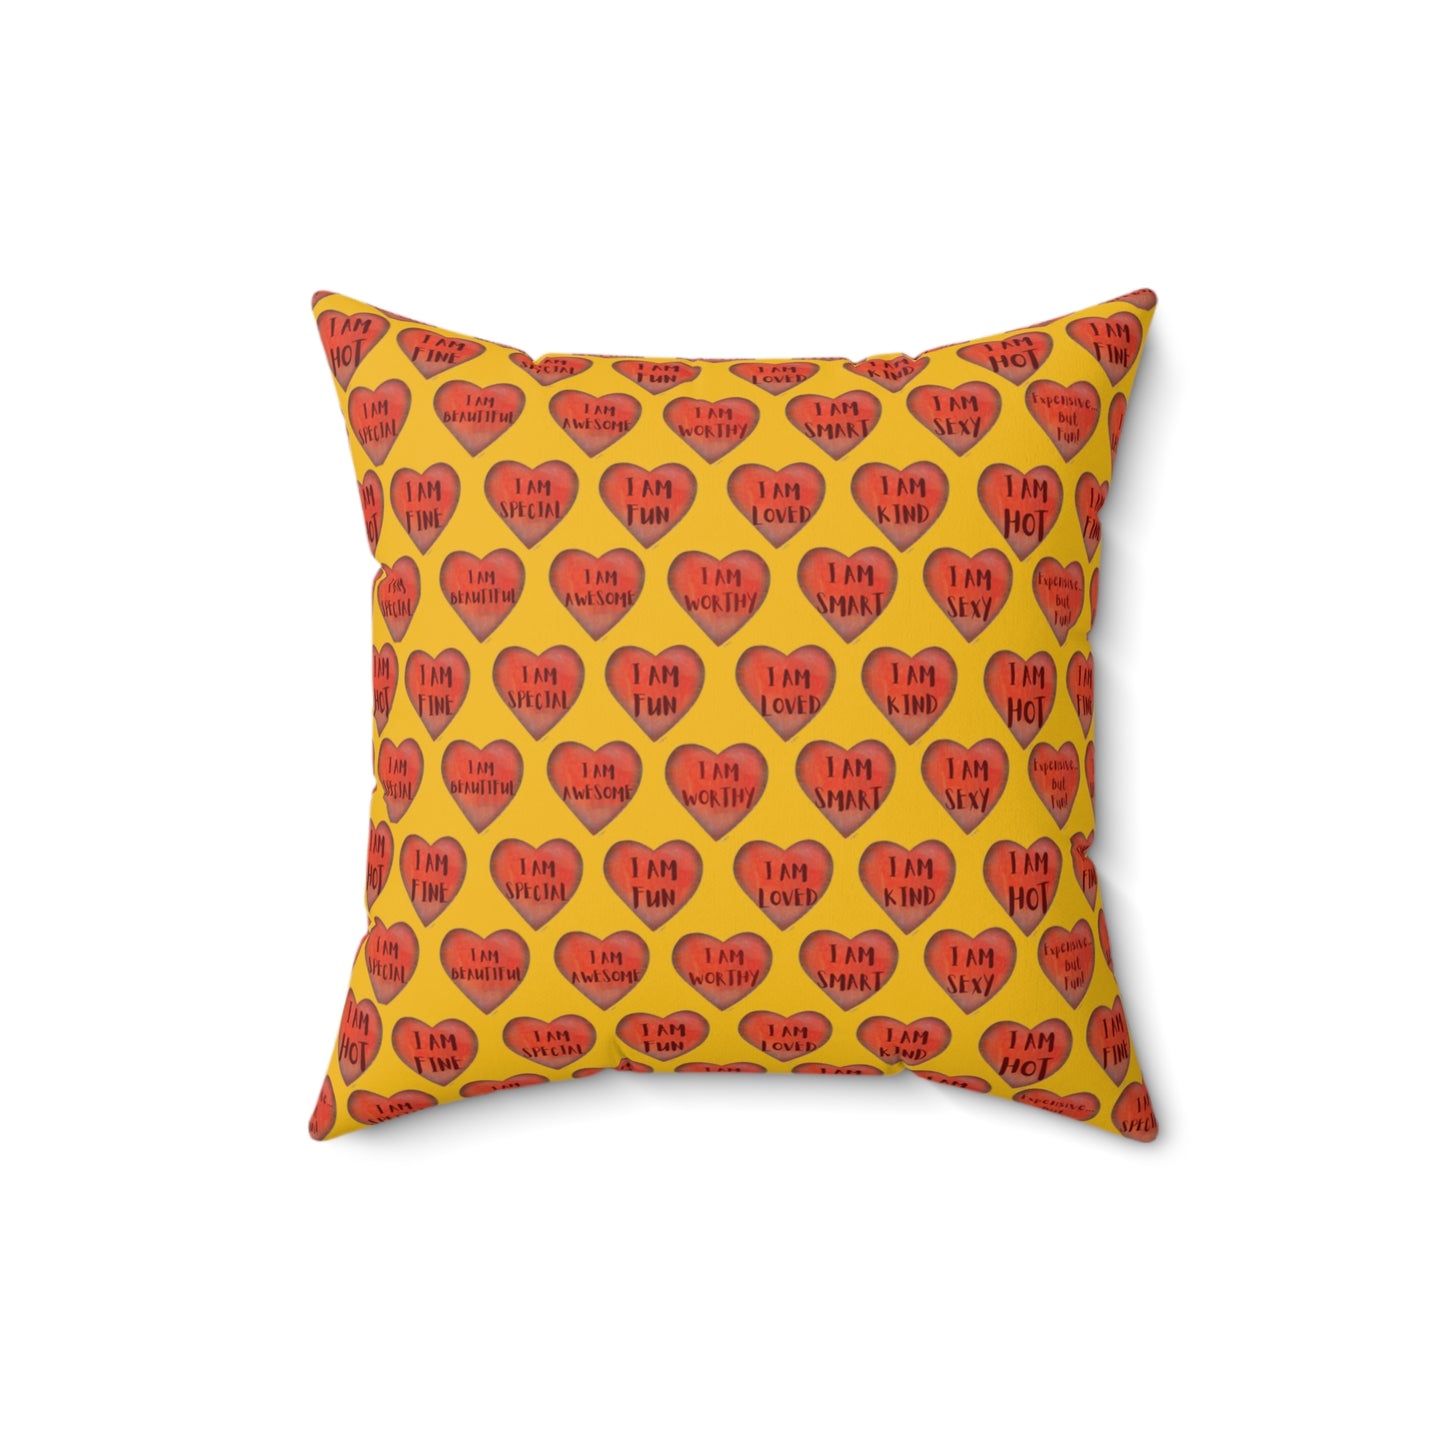 Colorful Faux Suede Pillow - Red Heart motivational pillow - Yellow Throw Pillow - Inspirational Decorative pillow